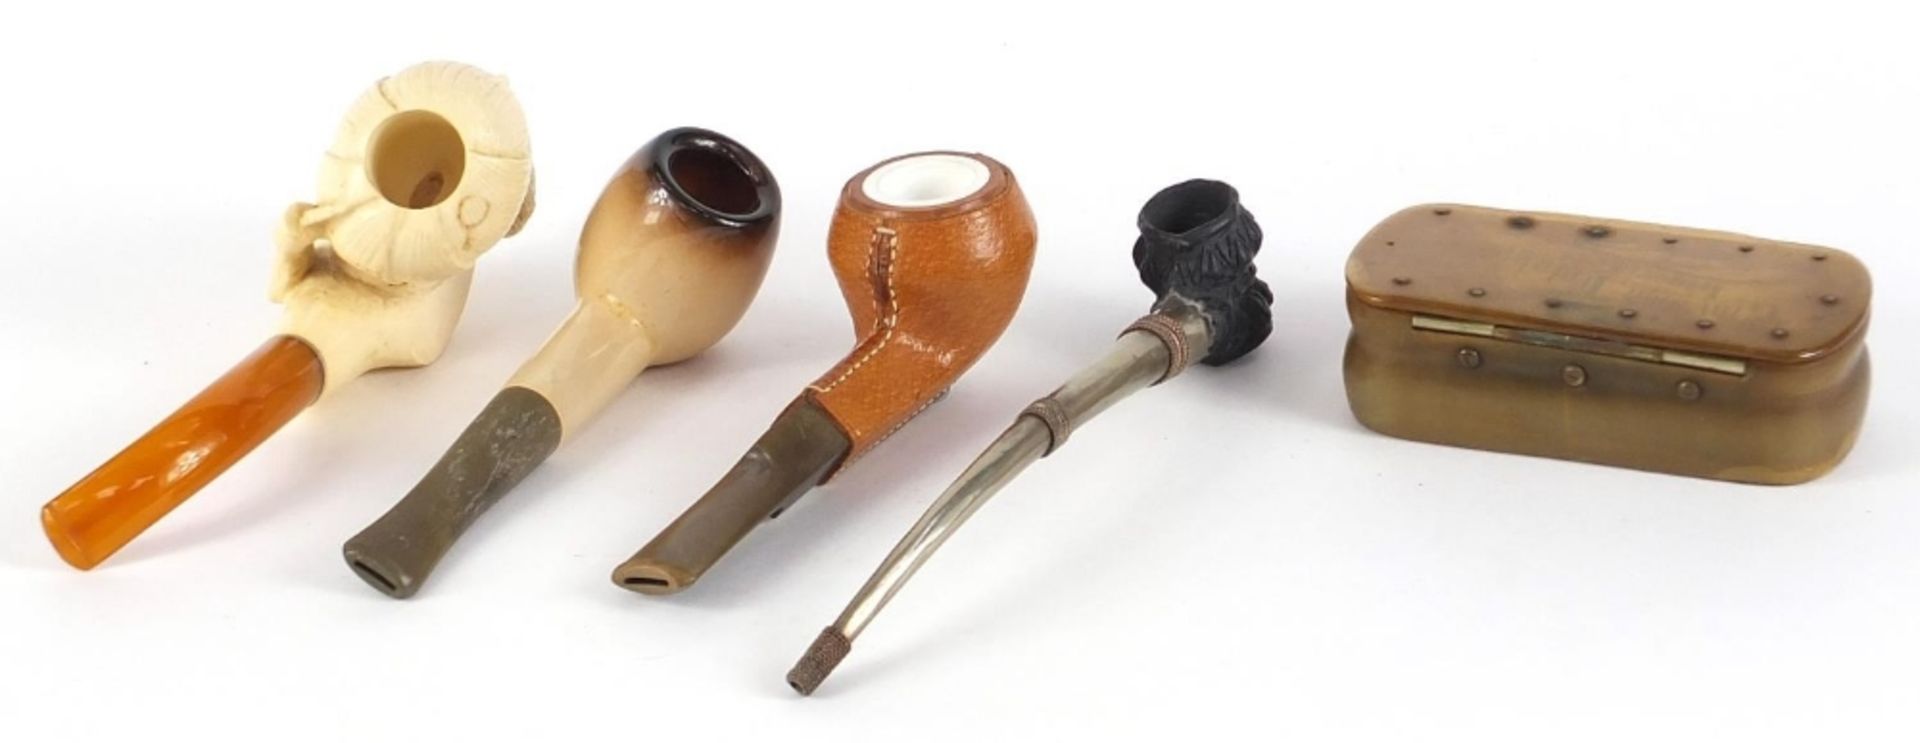 Smoking objects including an antique horn snuff box and a Meerschaum pipe with amber coloured - Bild 4 aus 6